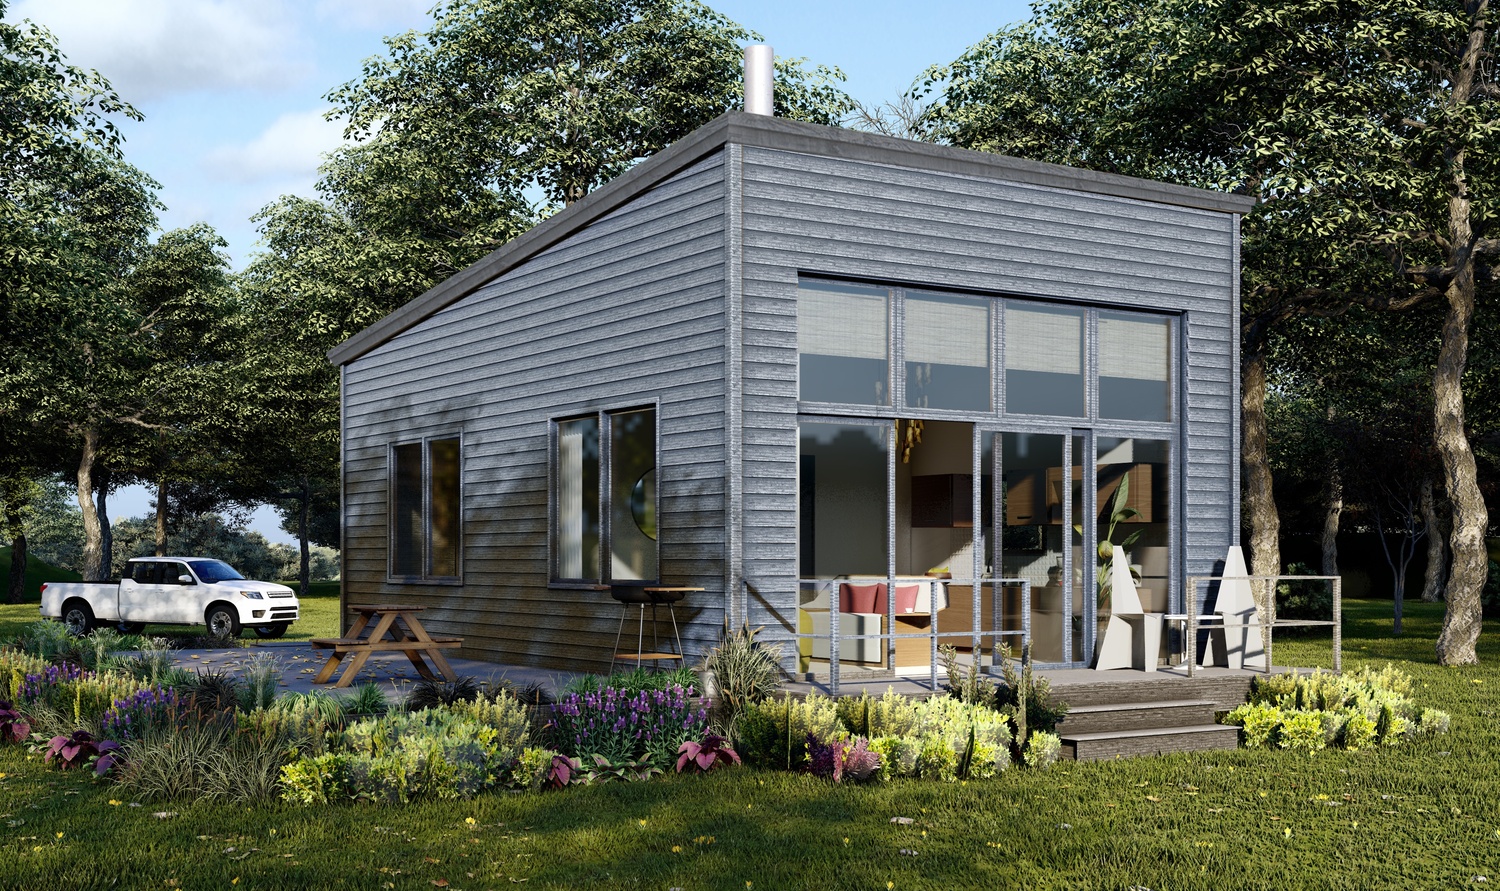 This 500-square-foot eco starter home on Shinnecock Bay used less CO2 in building materials, was easier to make energy efficient, and cost $140,000 to build.  NEA STUDIO